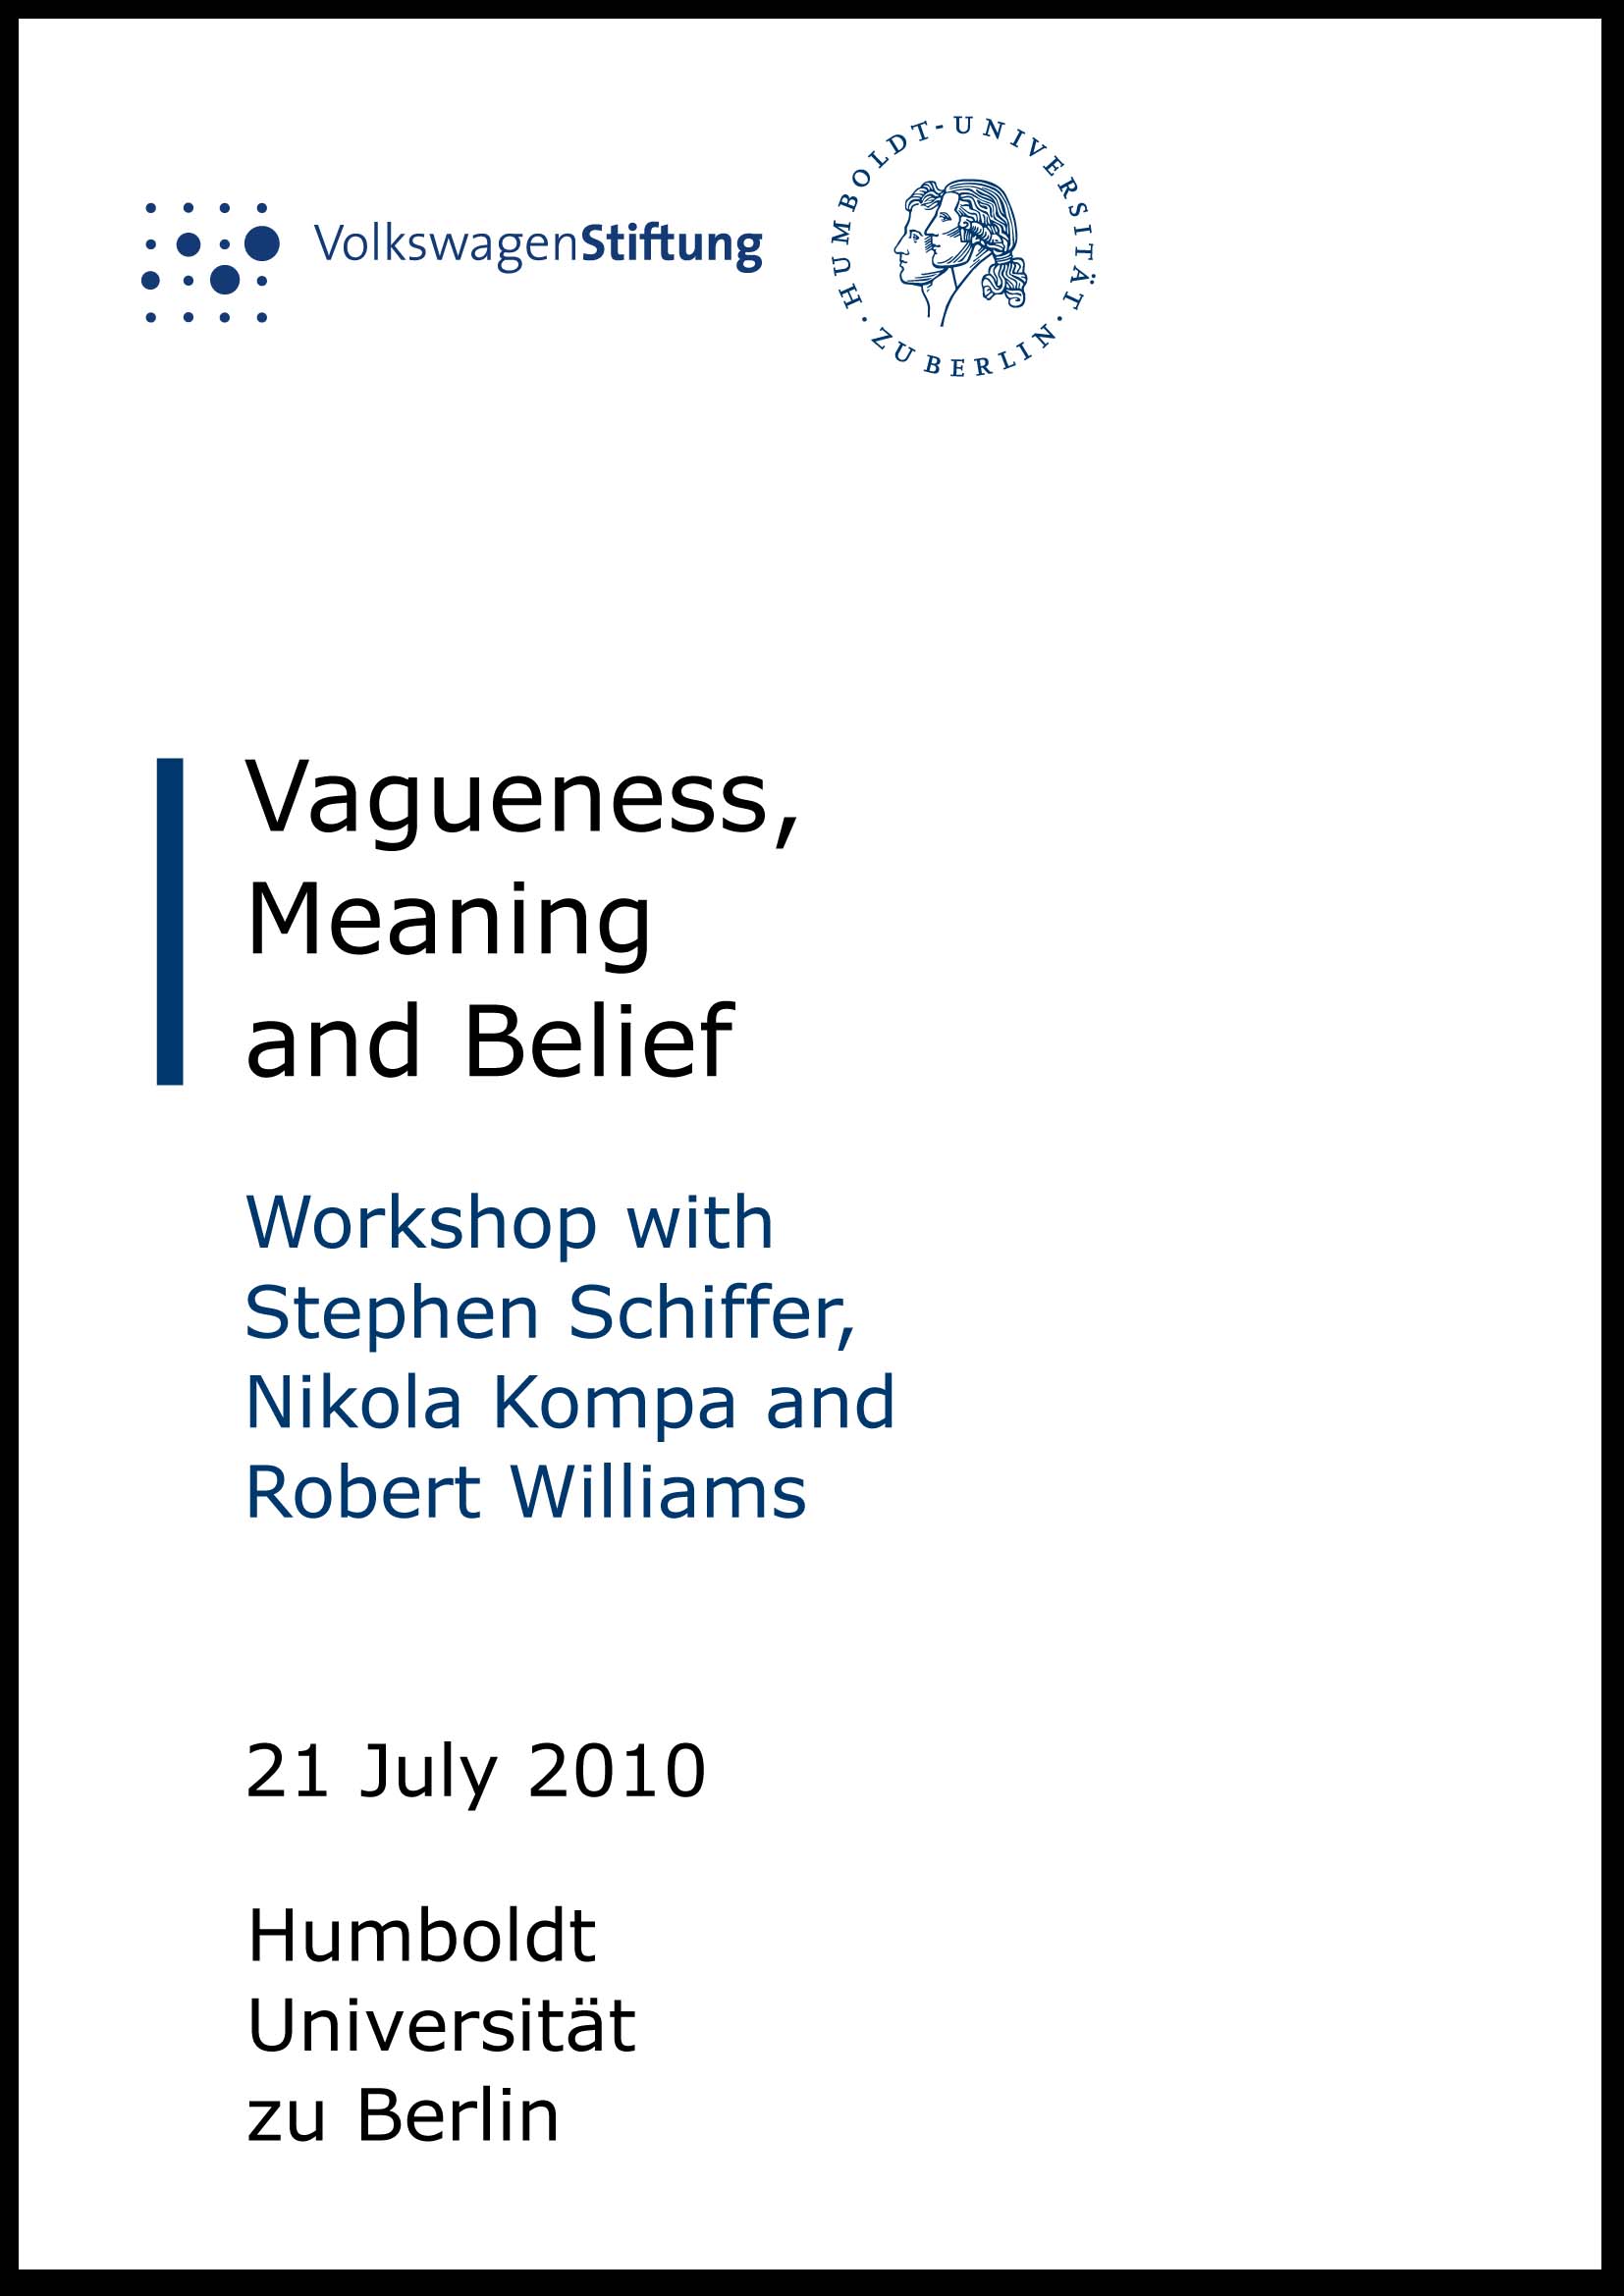 vagueness-meaning-belief.jpg